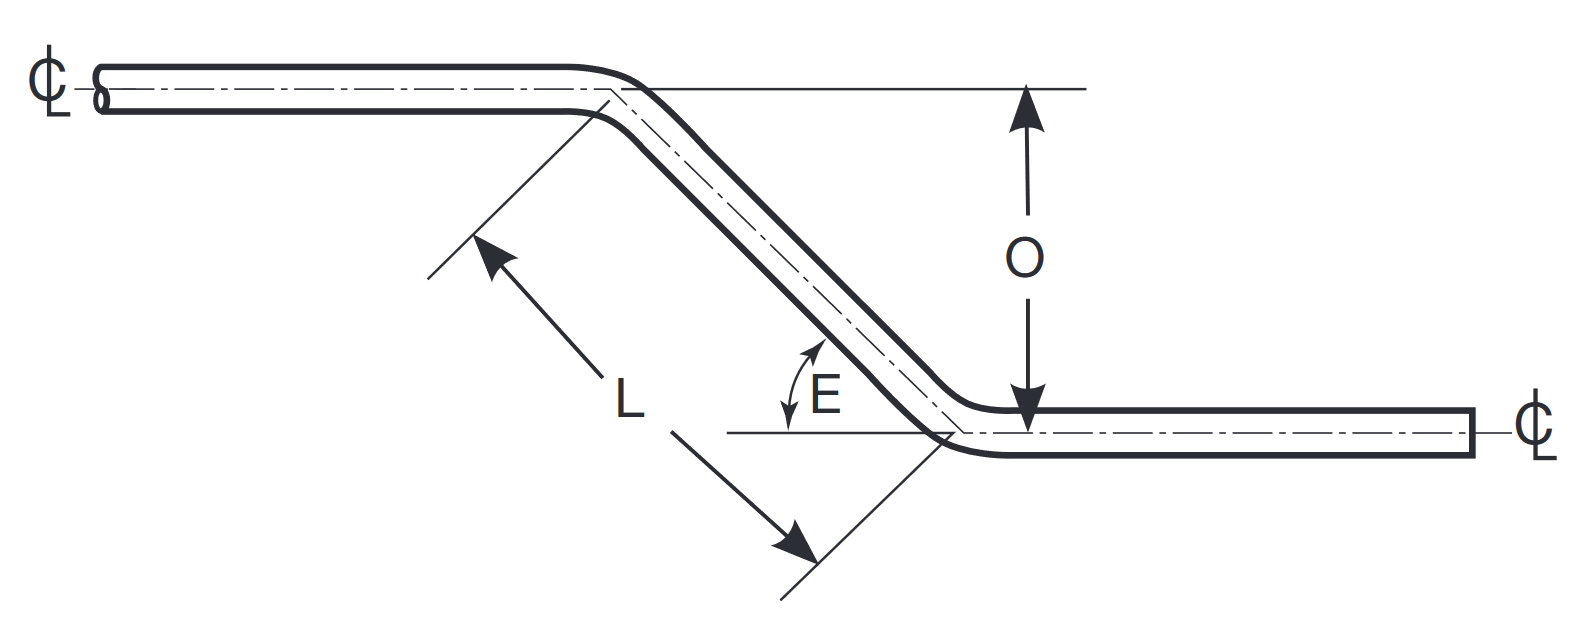 A diagram of a tube with offset bends with the distance between bends indicated by L.